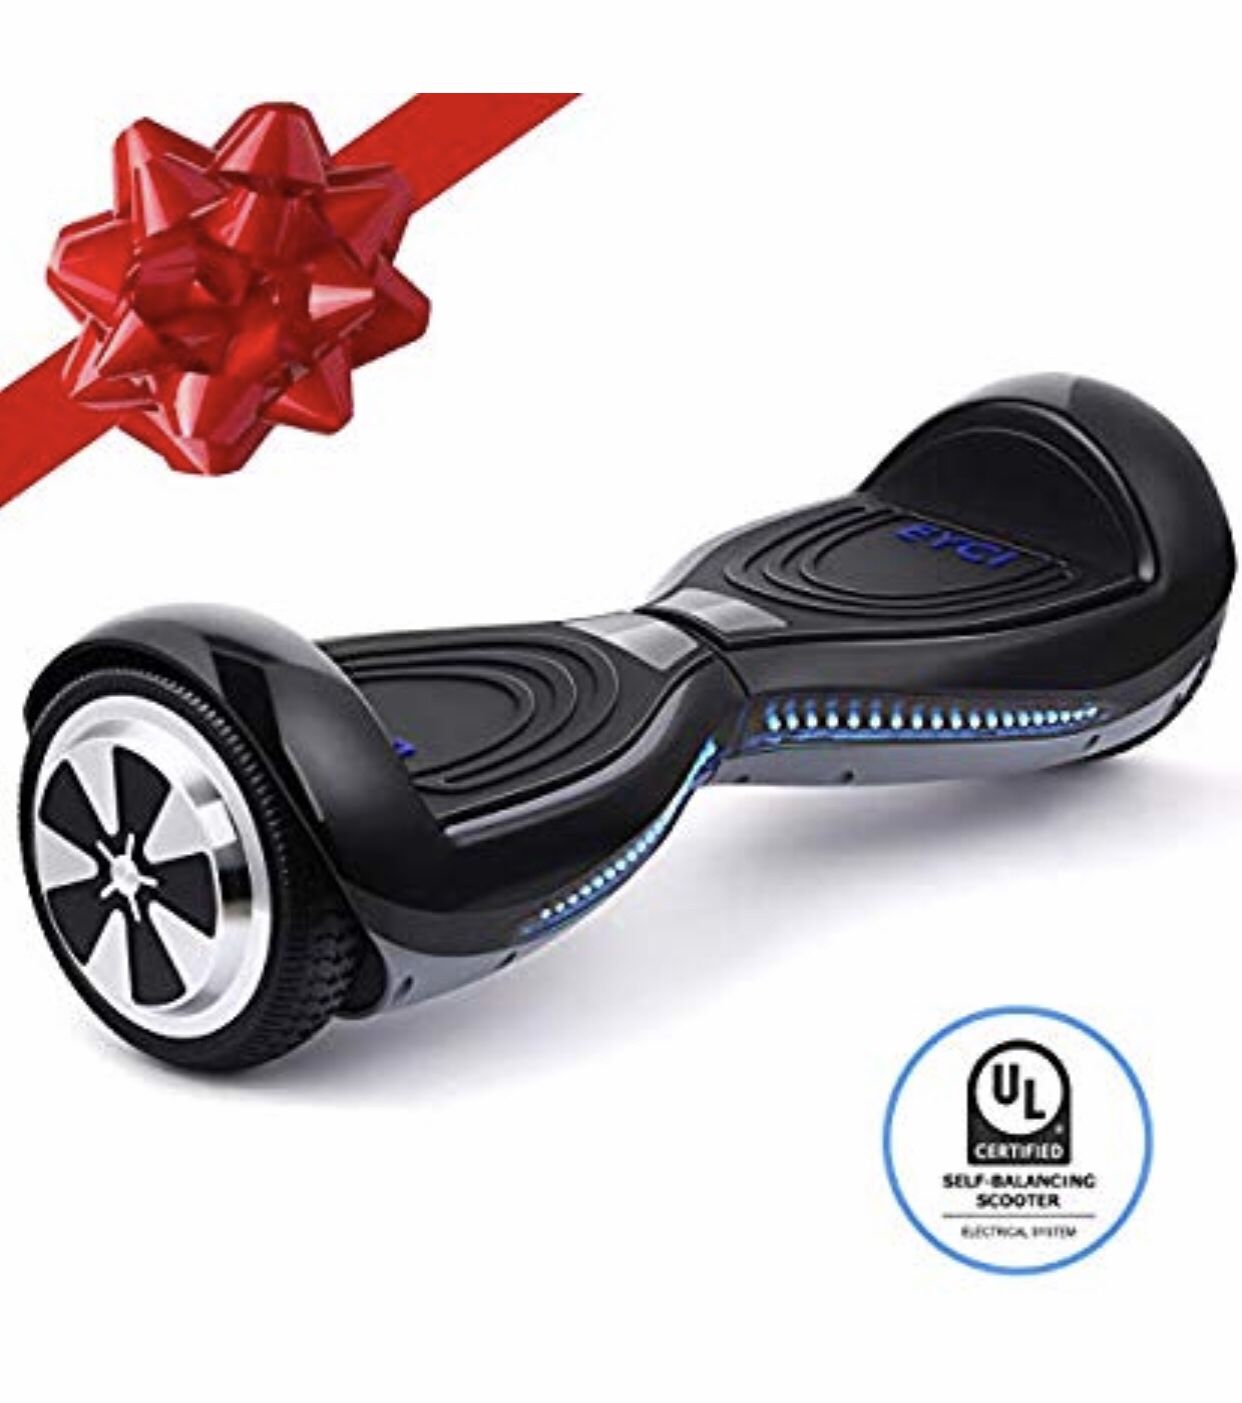 EYCI Hoverboard Electric Self Balancing Scooter UL 2272 Certified Two Smart 6.5" Wheel Scooter with 250W Dual-Motor Ideal Gift for Kids & Adults (Bla